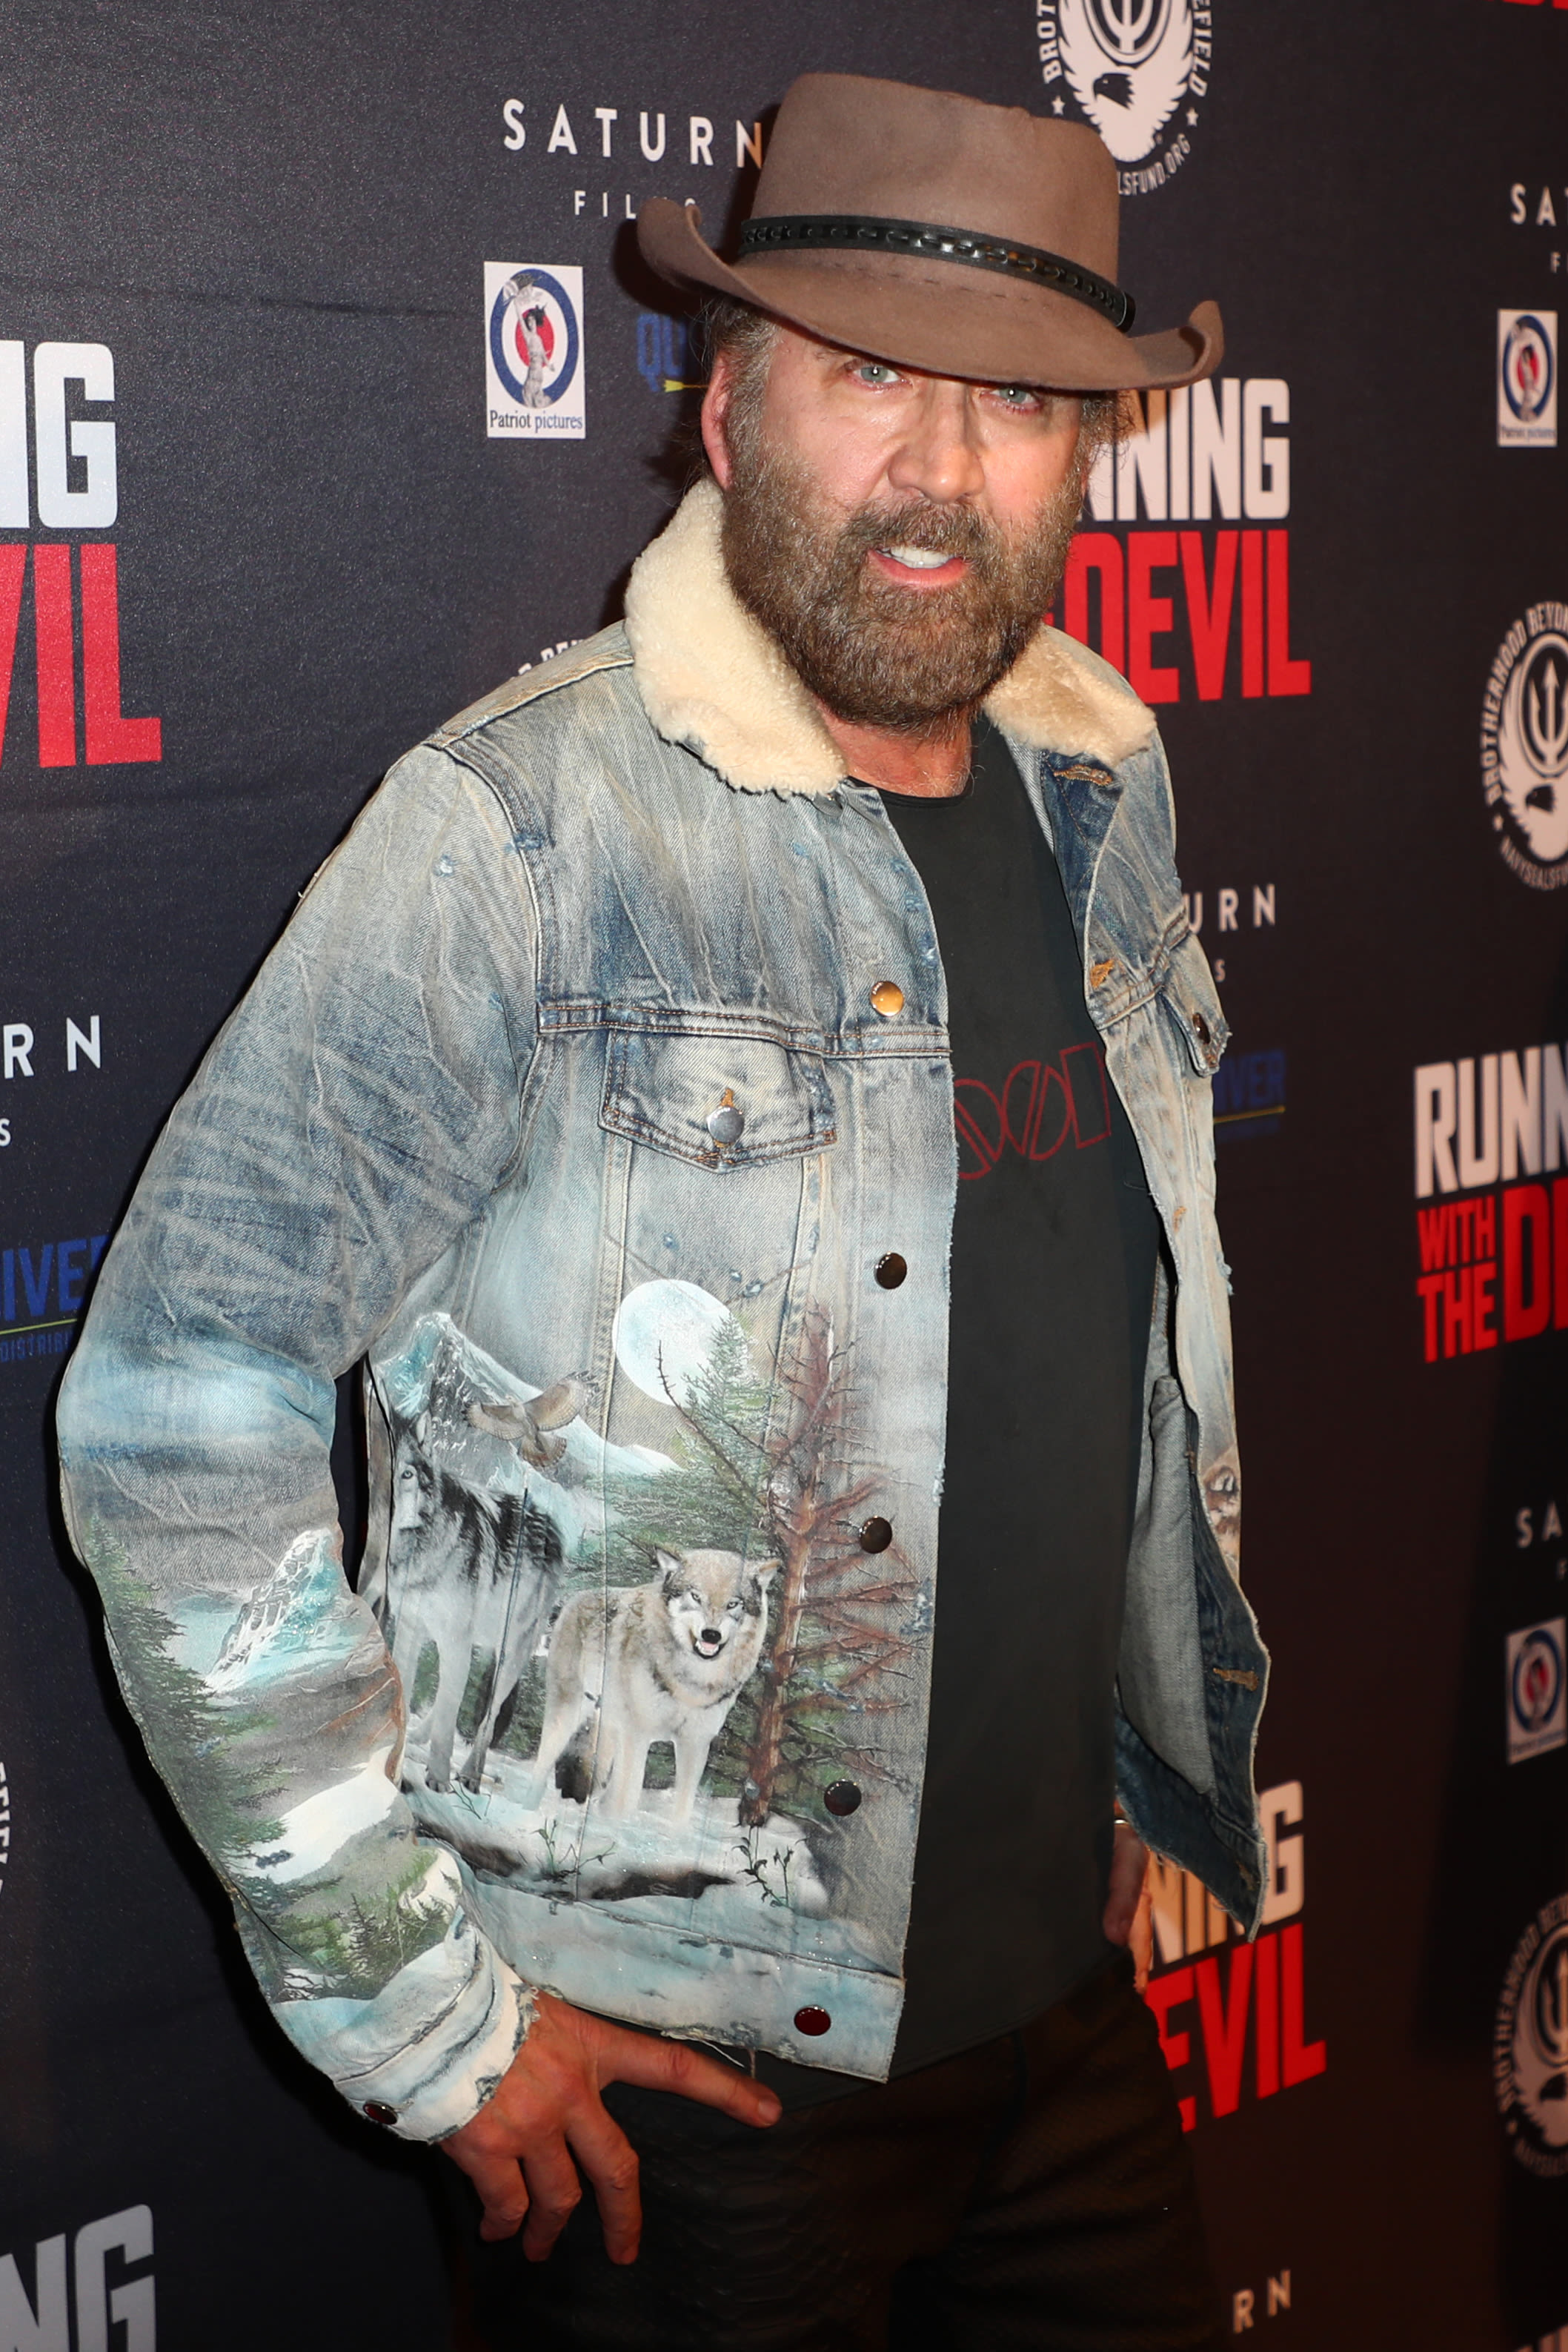 Nicolas Cage's bushy beard and cowboy hat are out in full force at movie premiere